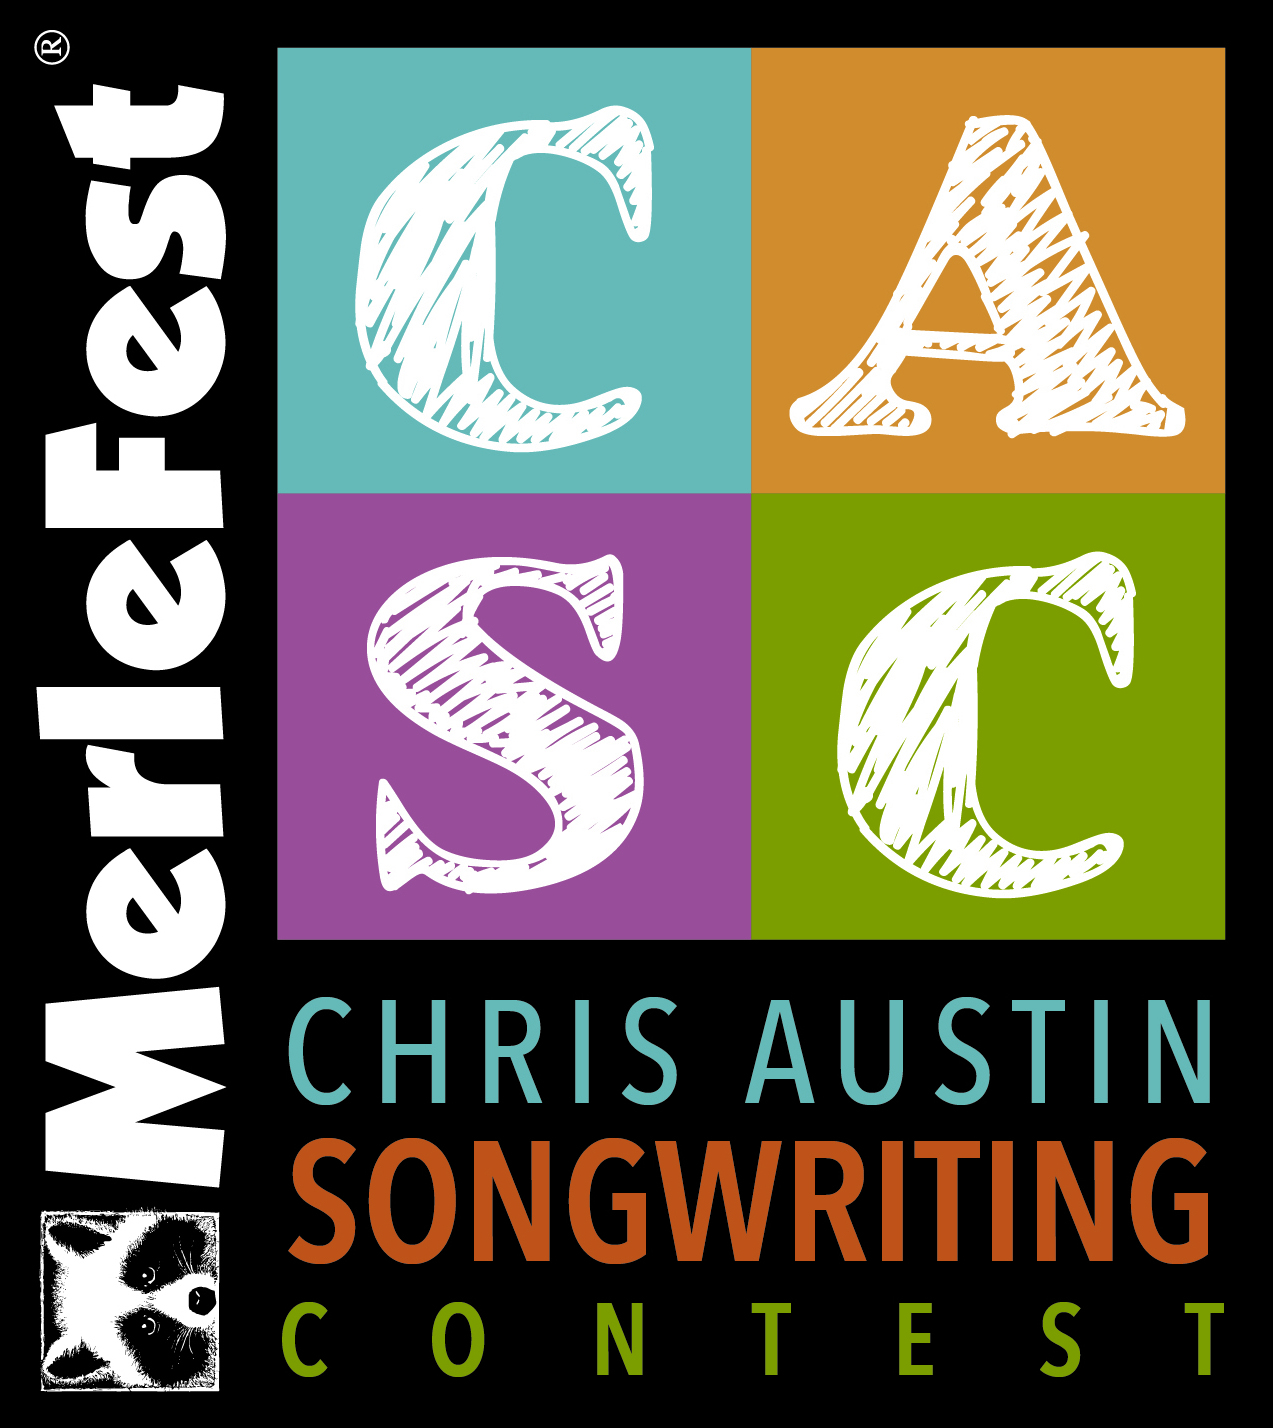 Chris Austin Songwriting Contest Accepting Entries on October 1